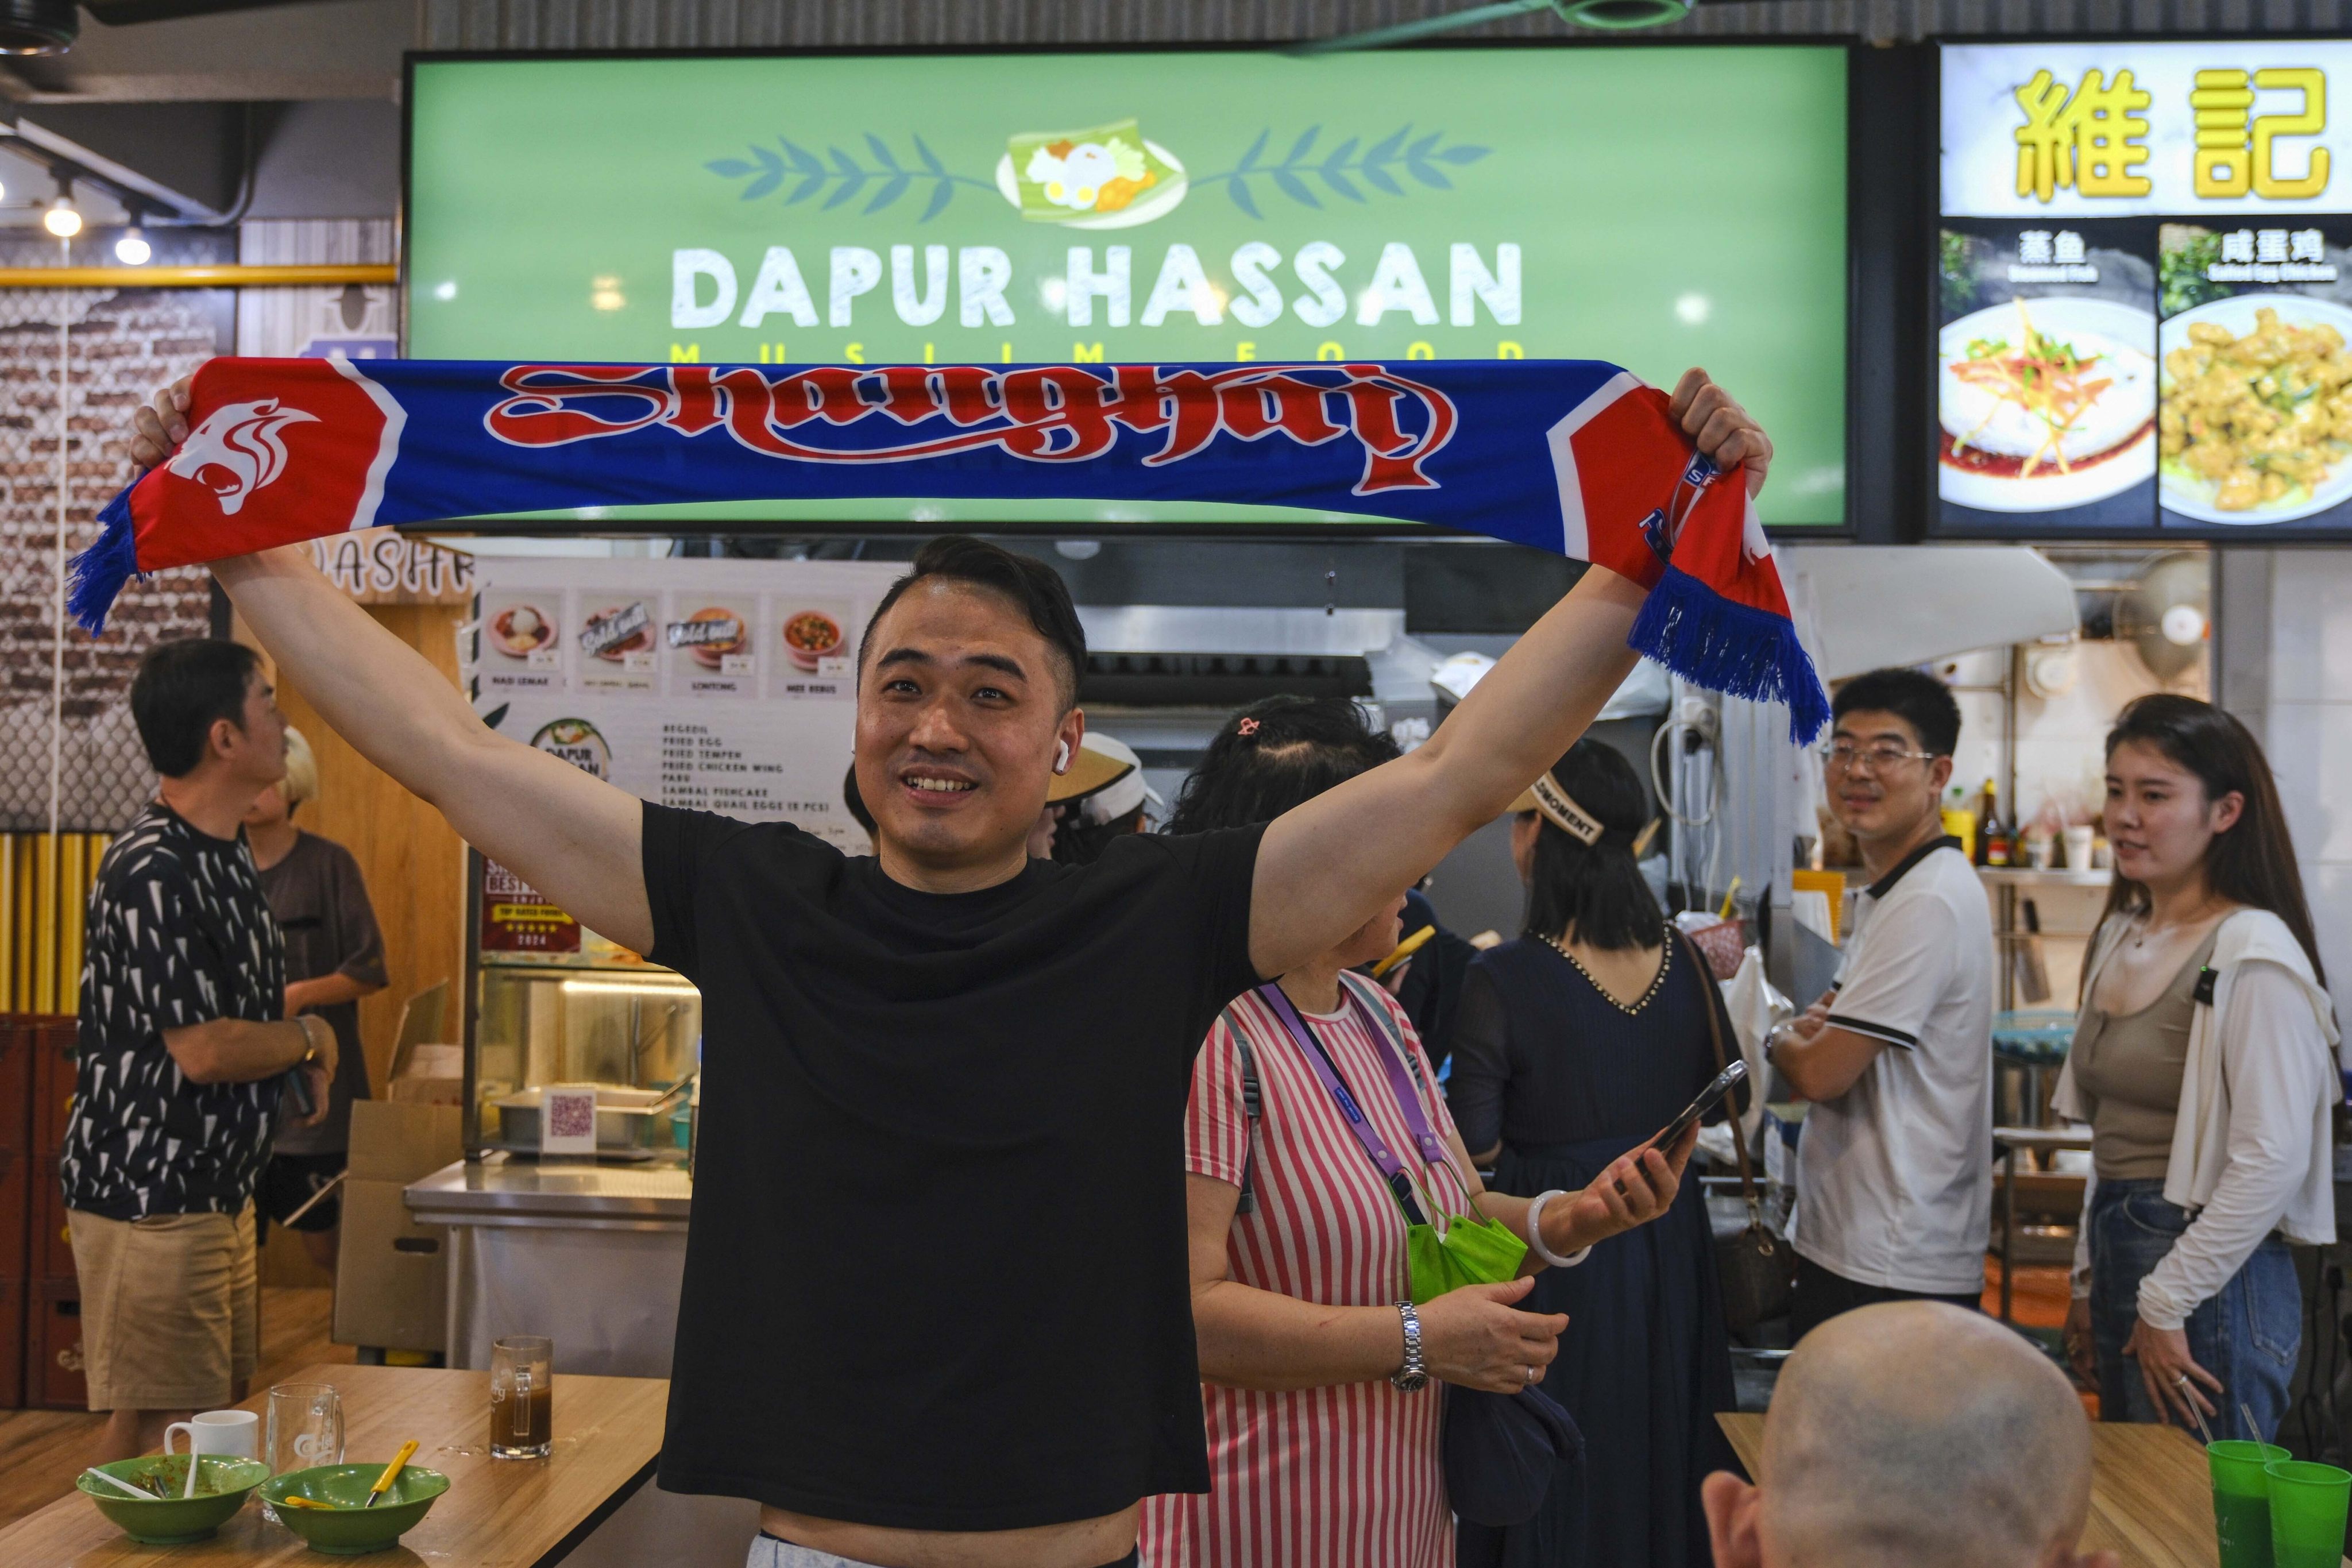 A Chinese football fan in front of Singaporean goalkeeper Hassan Sunny’s food stall in Singapore on Friday. Photo: AP